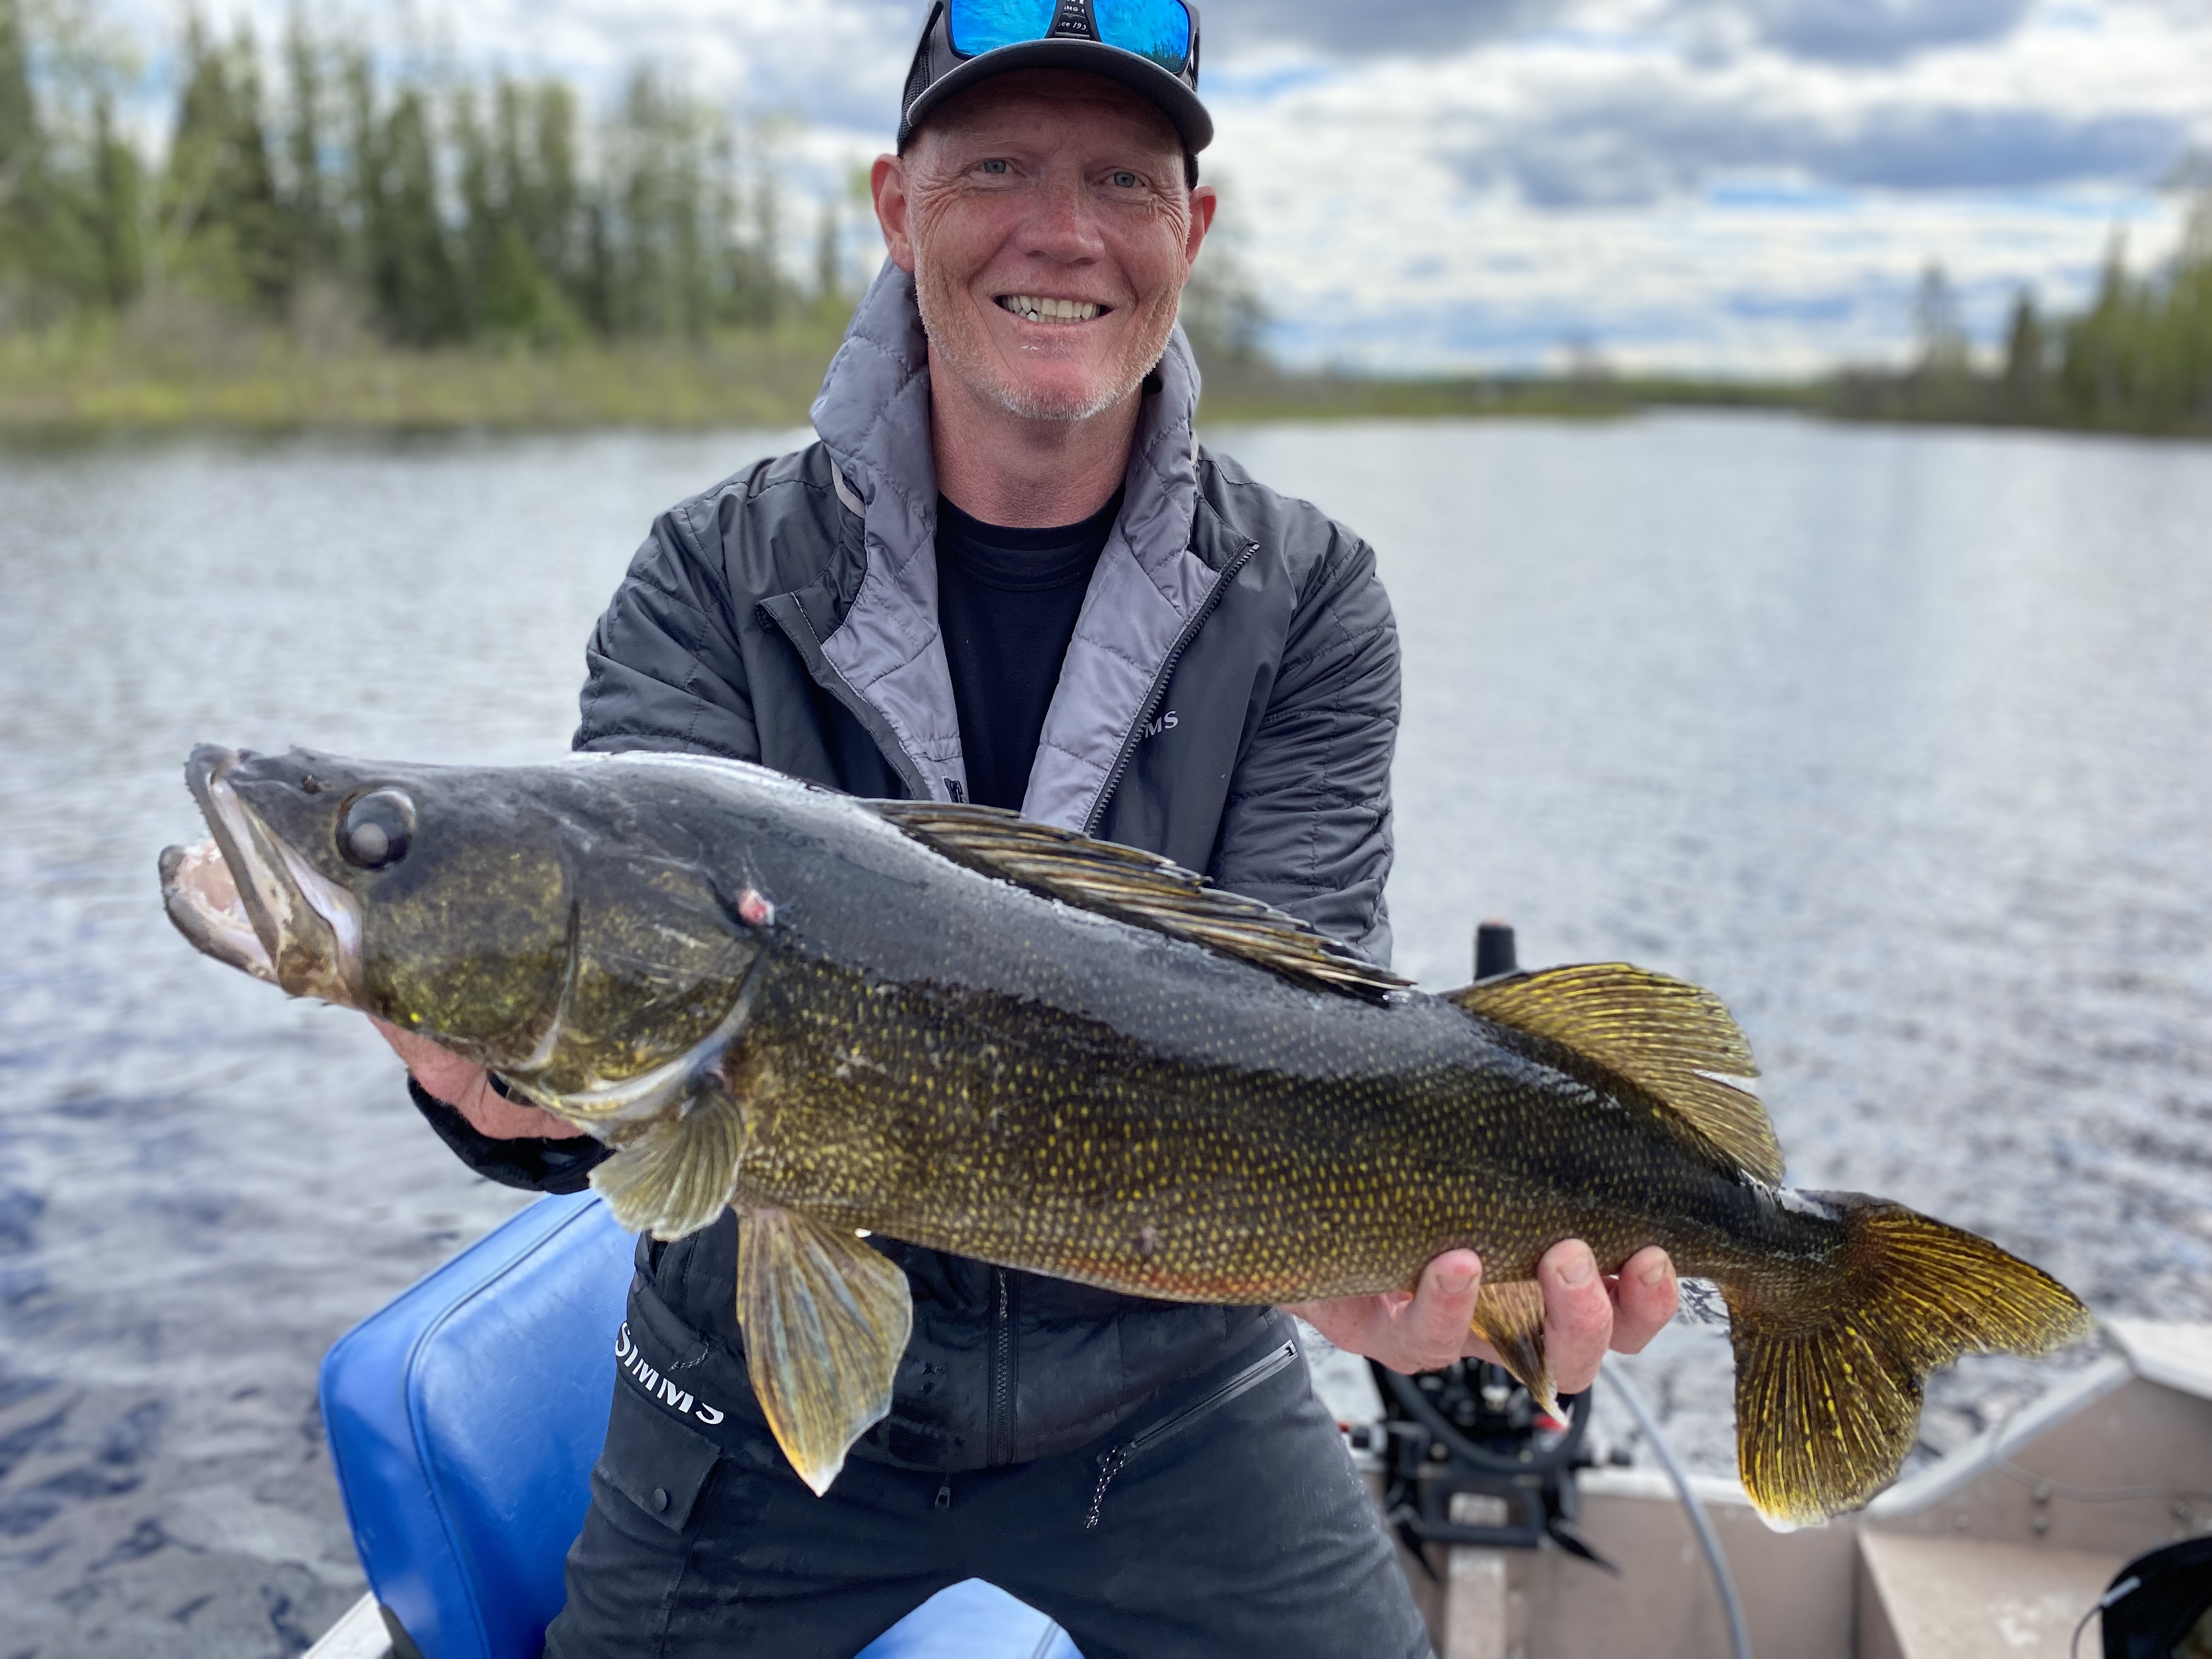 The Canadian Fisherman - Fishing reviews, tips and stories